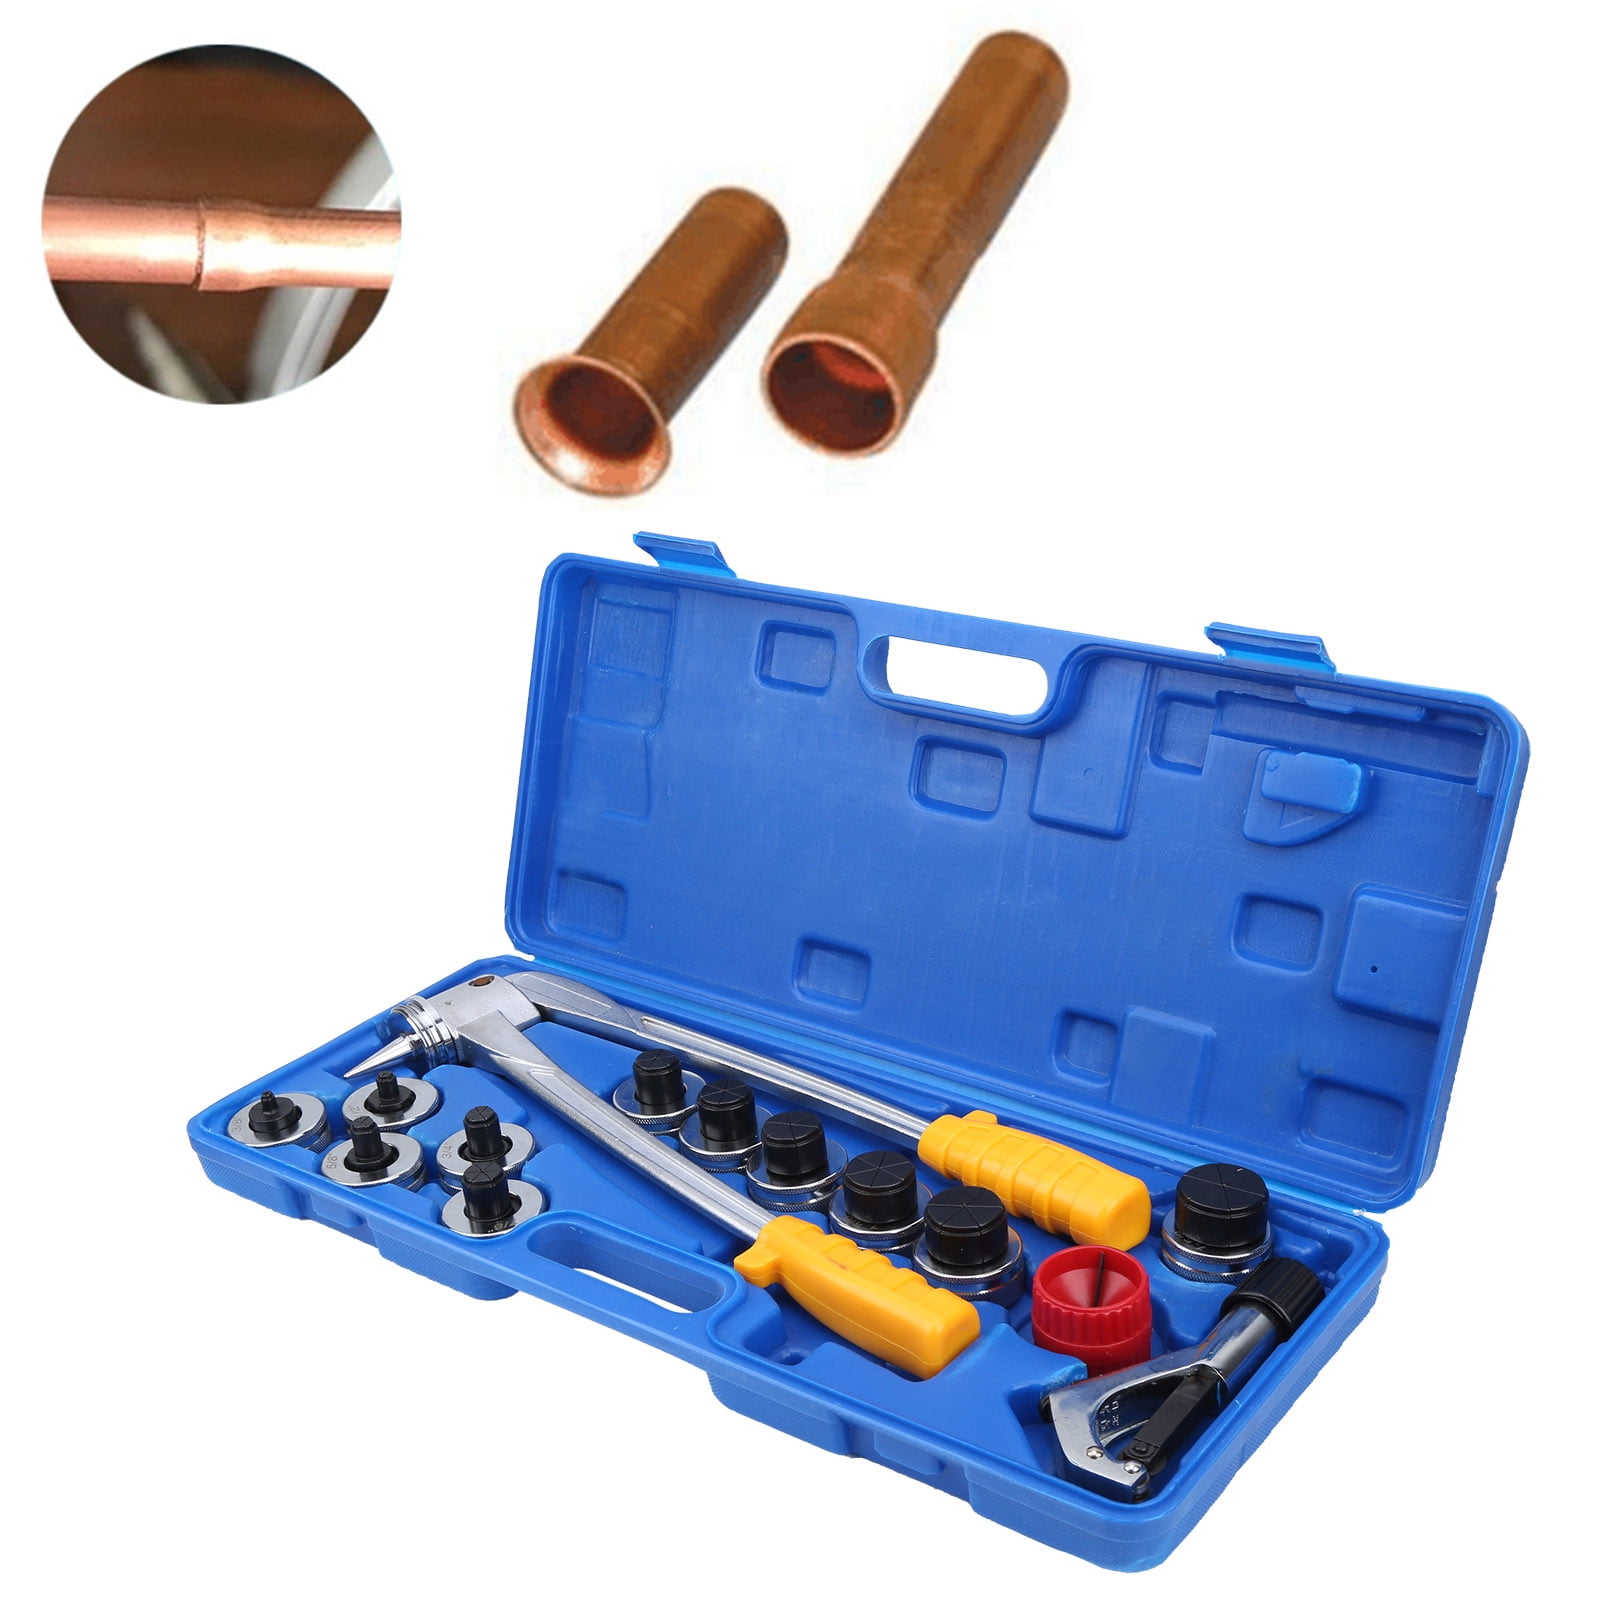 CT-100A Manual Tube Expander Compact Bender Kit Tool HVAC Tools Tube Piping Pipe Copper Pipe Tubing Bending Tool Kit for Tube and Pipe Bending 